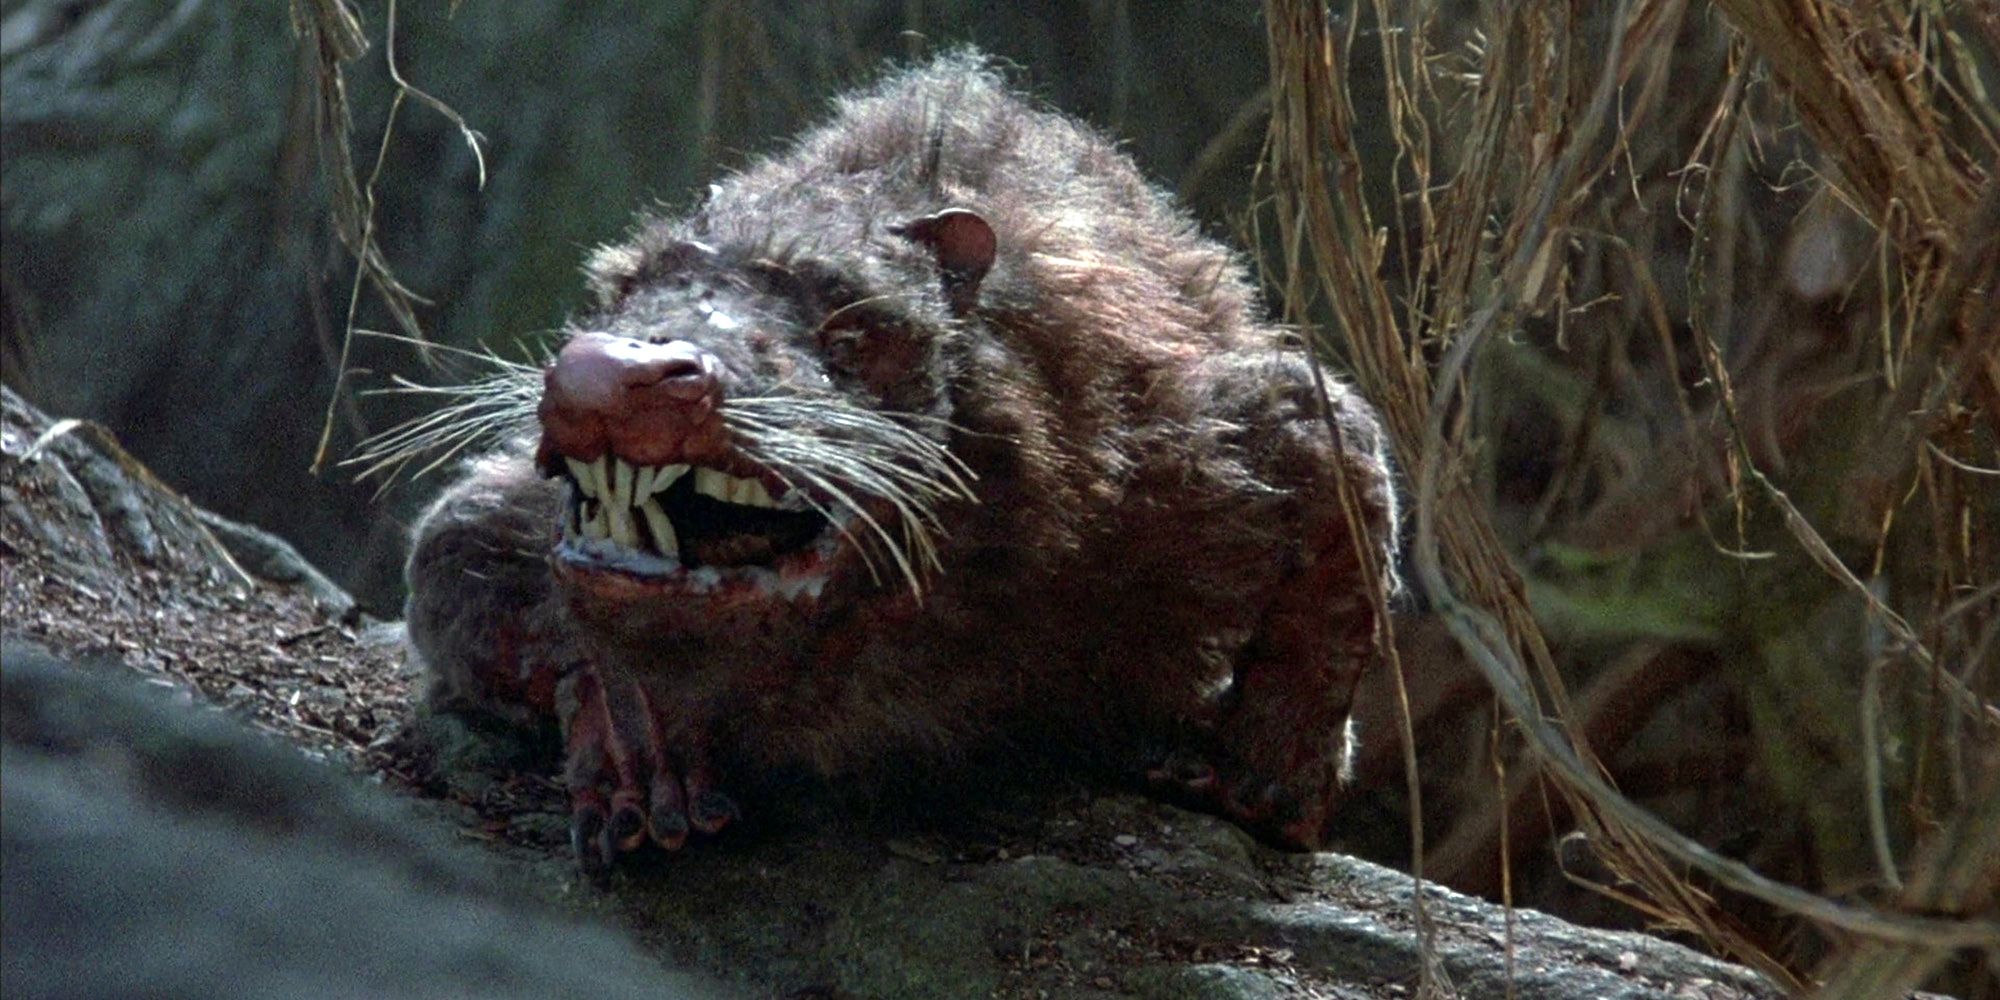 A rodent of unusual size, from The Princess Bride